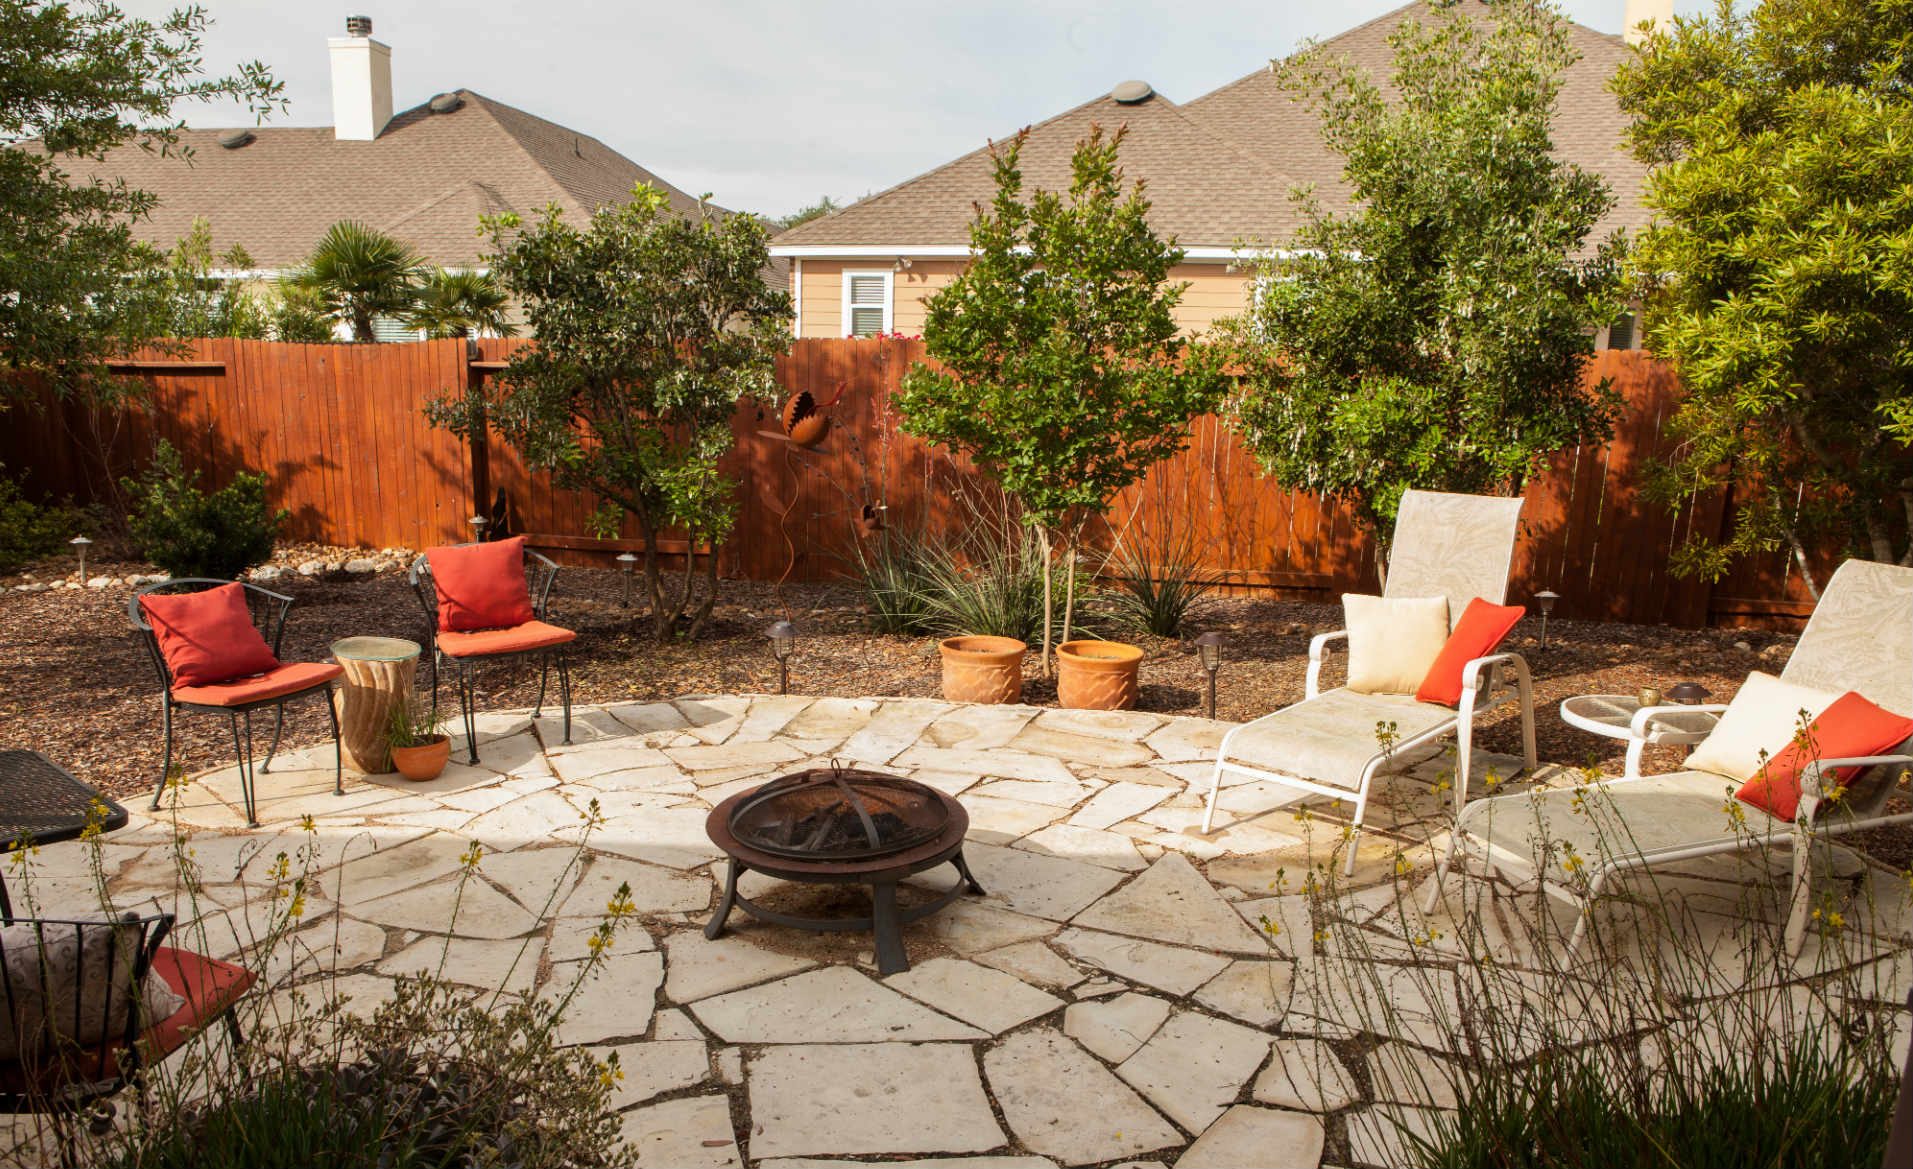 Large flagstone patio with a fire bowl to relax around.